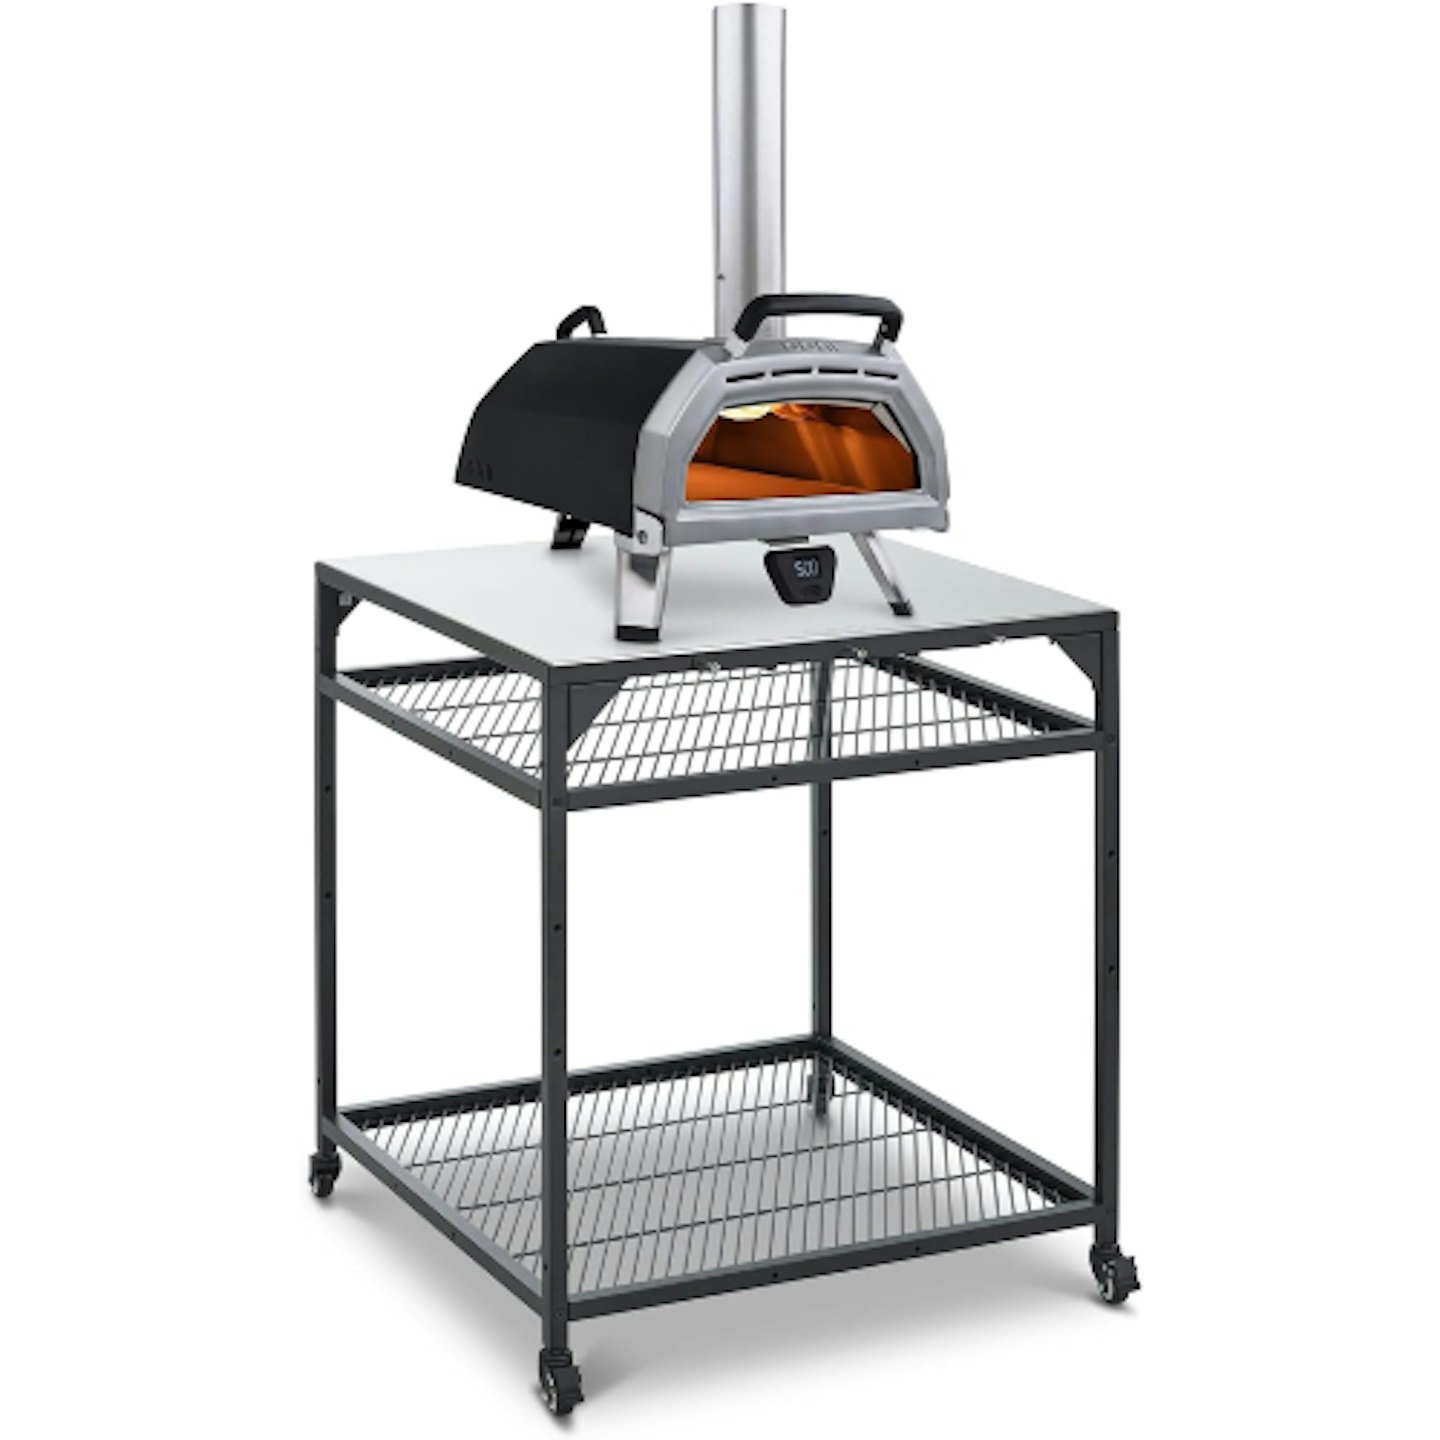 Ooni pizza oven table 